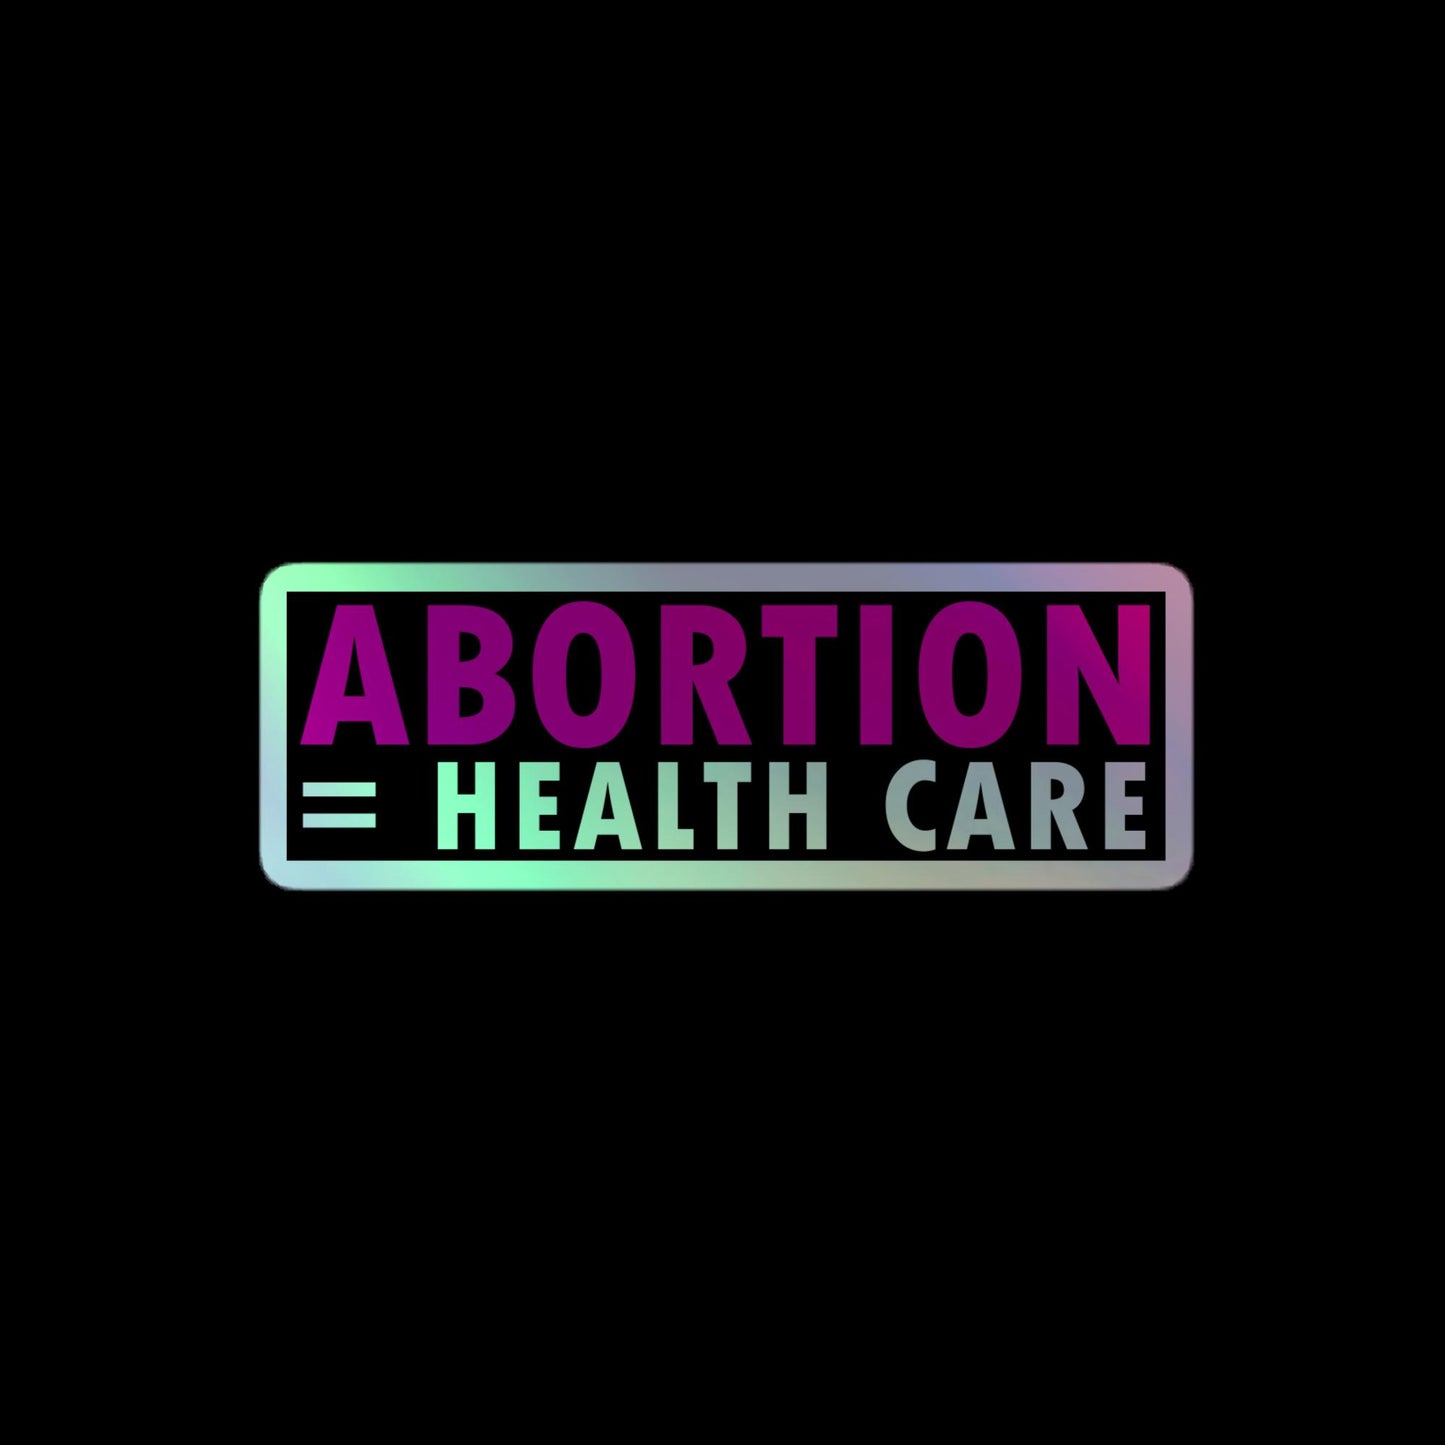 Abortion Equals Health Care Holographic Stickers